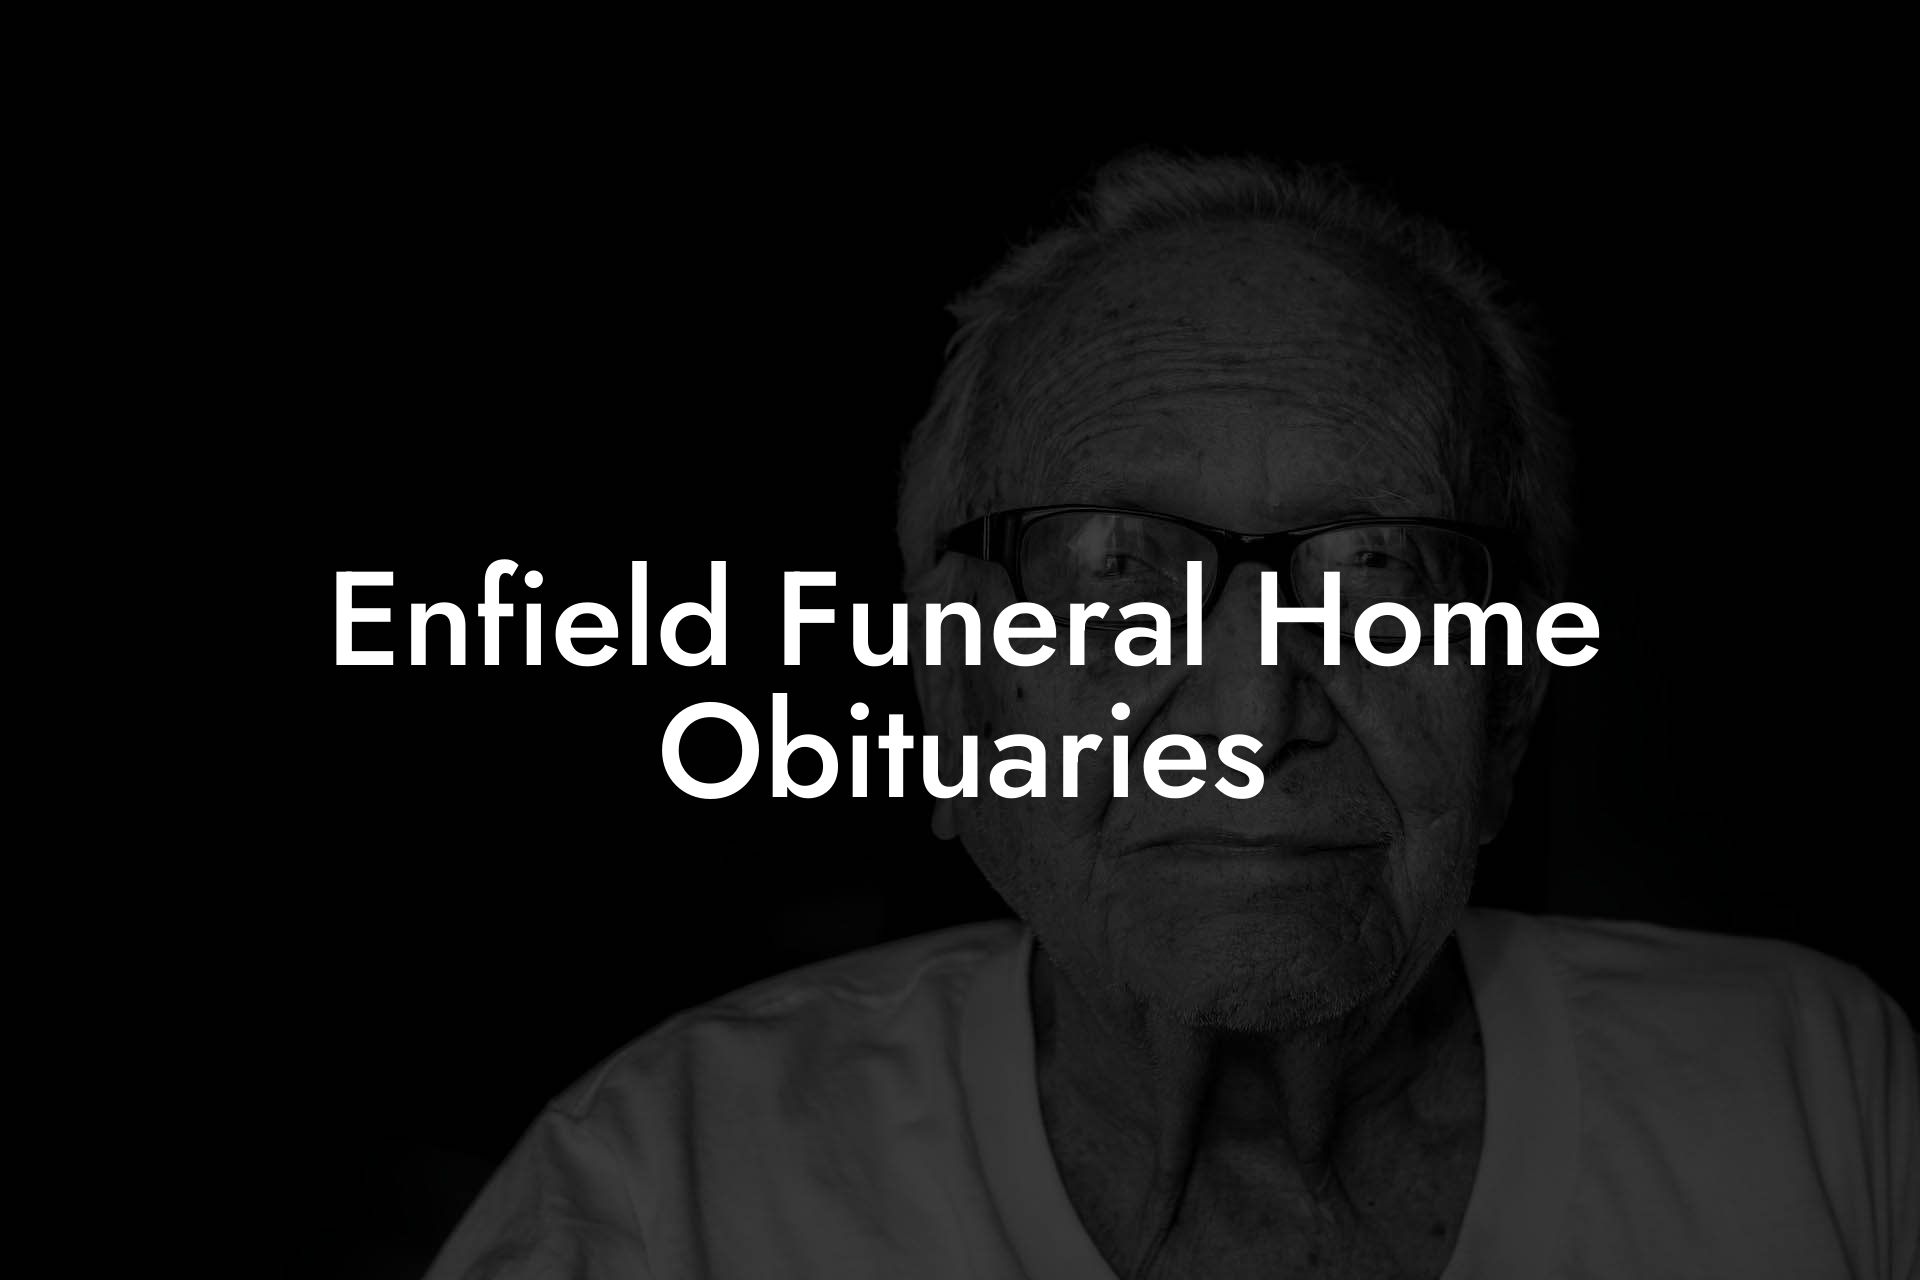 Enfield Funeral Home Obituaries